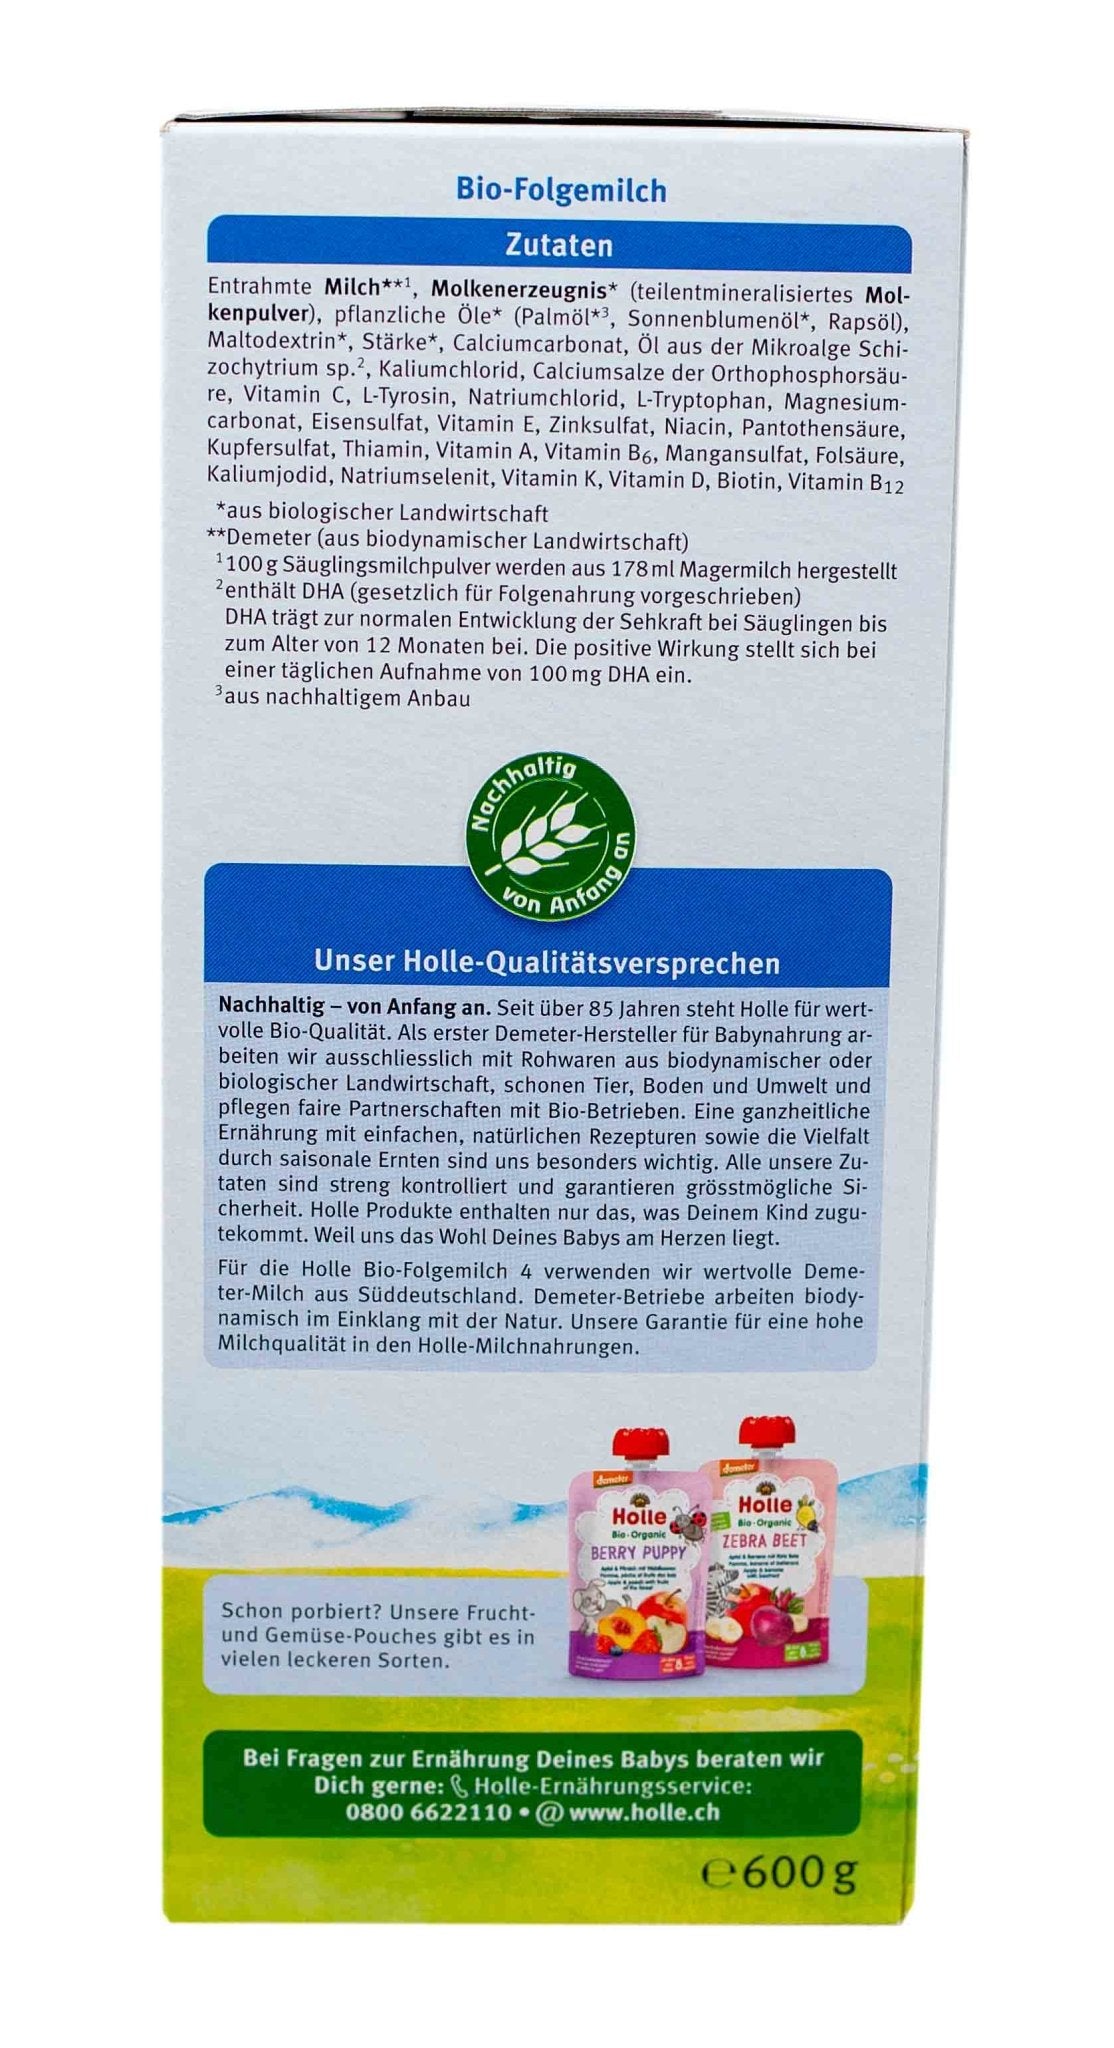 Holle Bio Stage 4 (600g) Organic Toddler Formula - The Milky Box